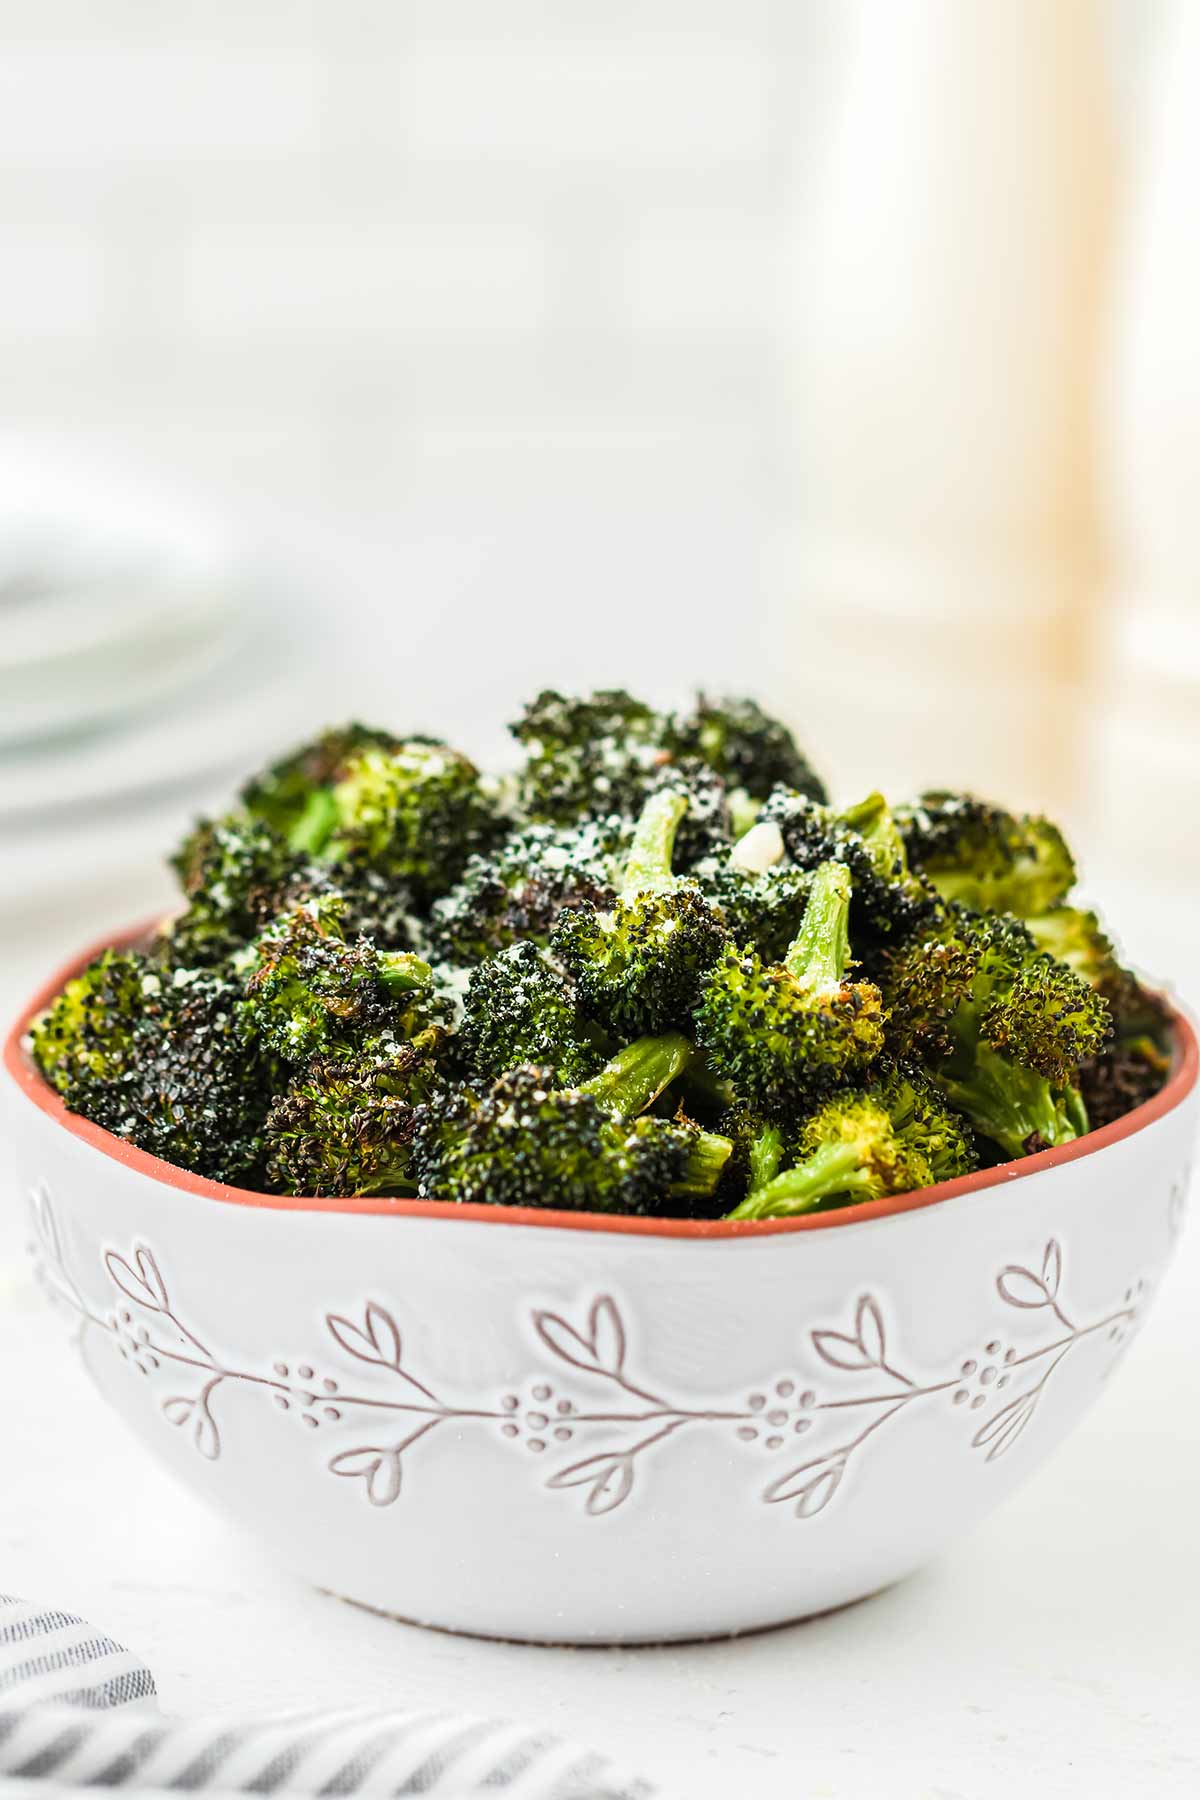 Roasted broccoli in a light gray bowl on a countertop, garnished with grated Parmesan cheese.